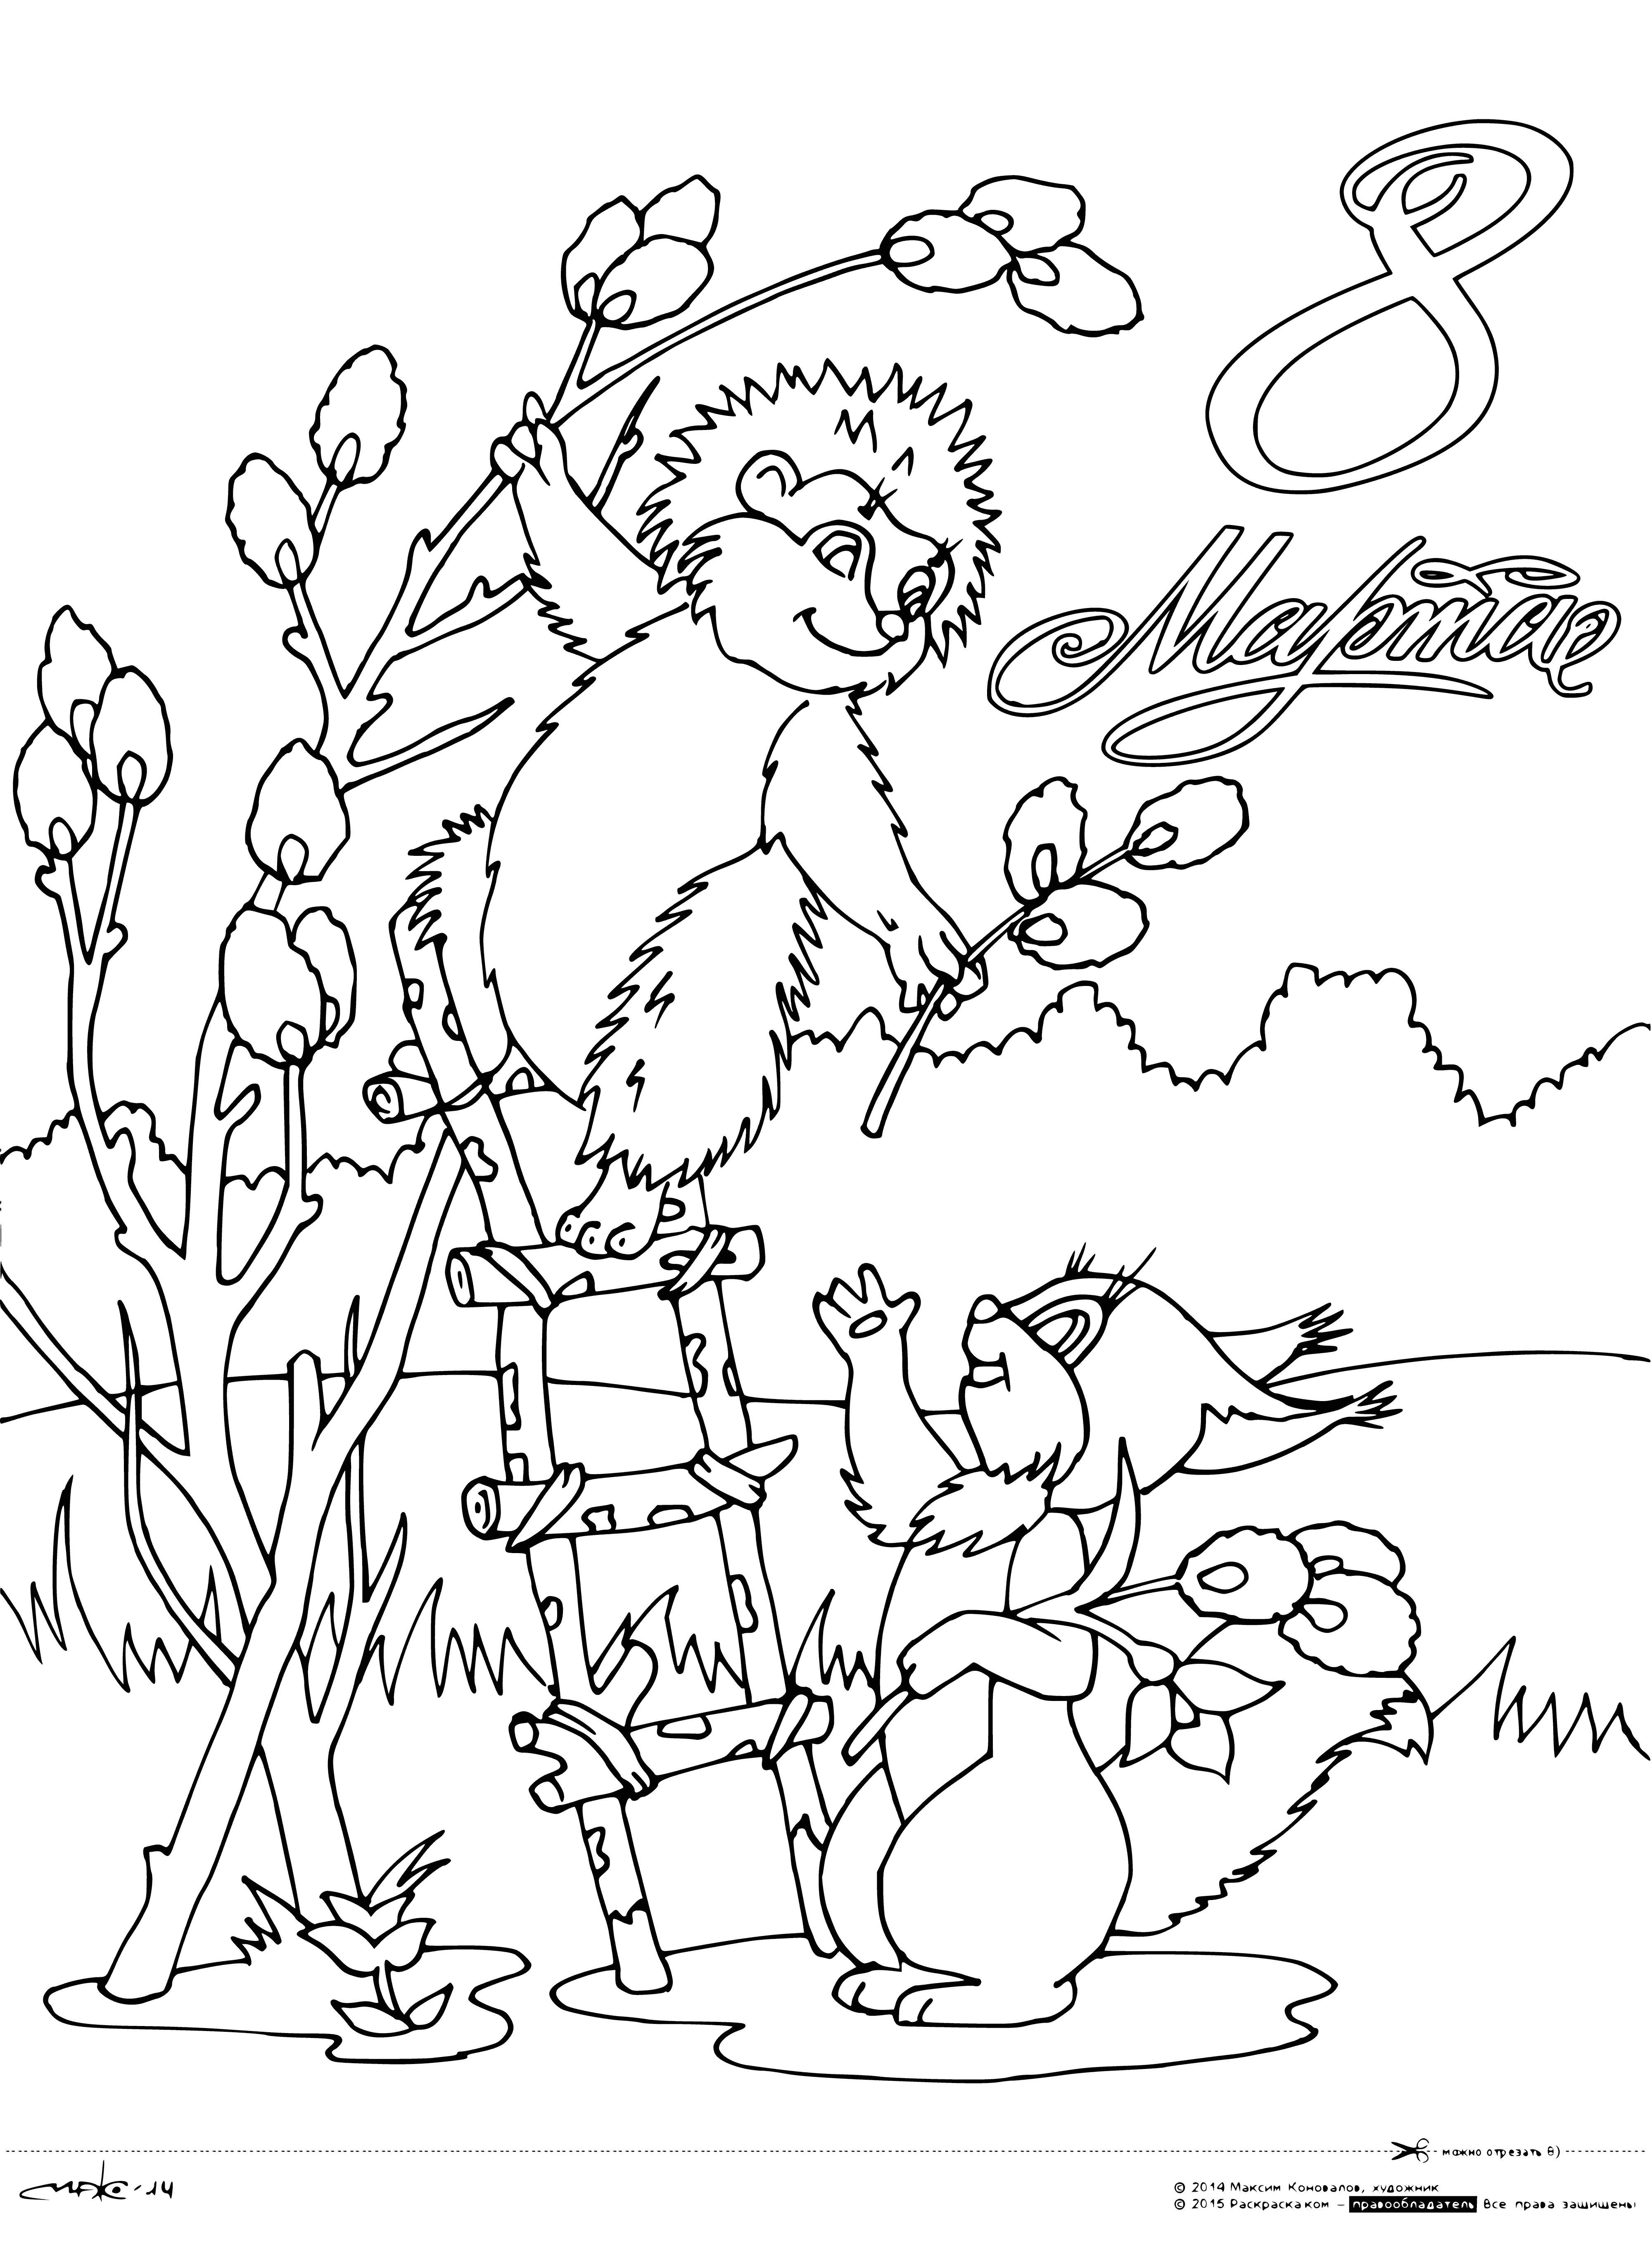 Gift for March 8 coloring page